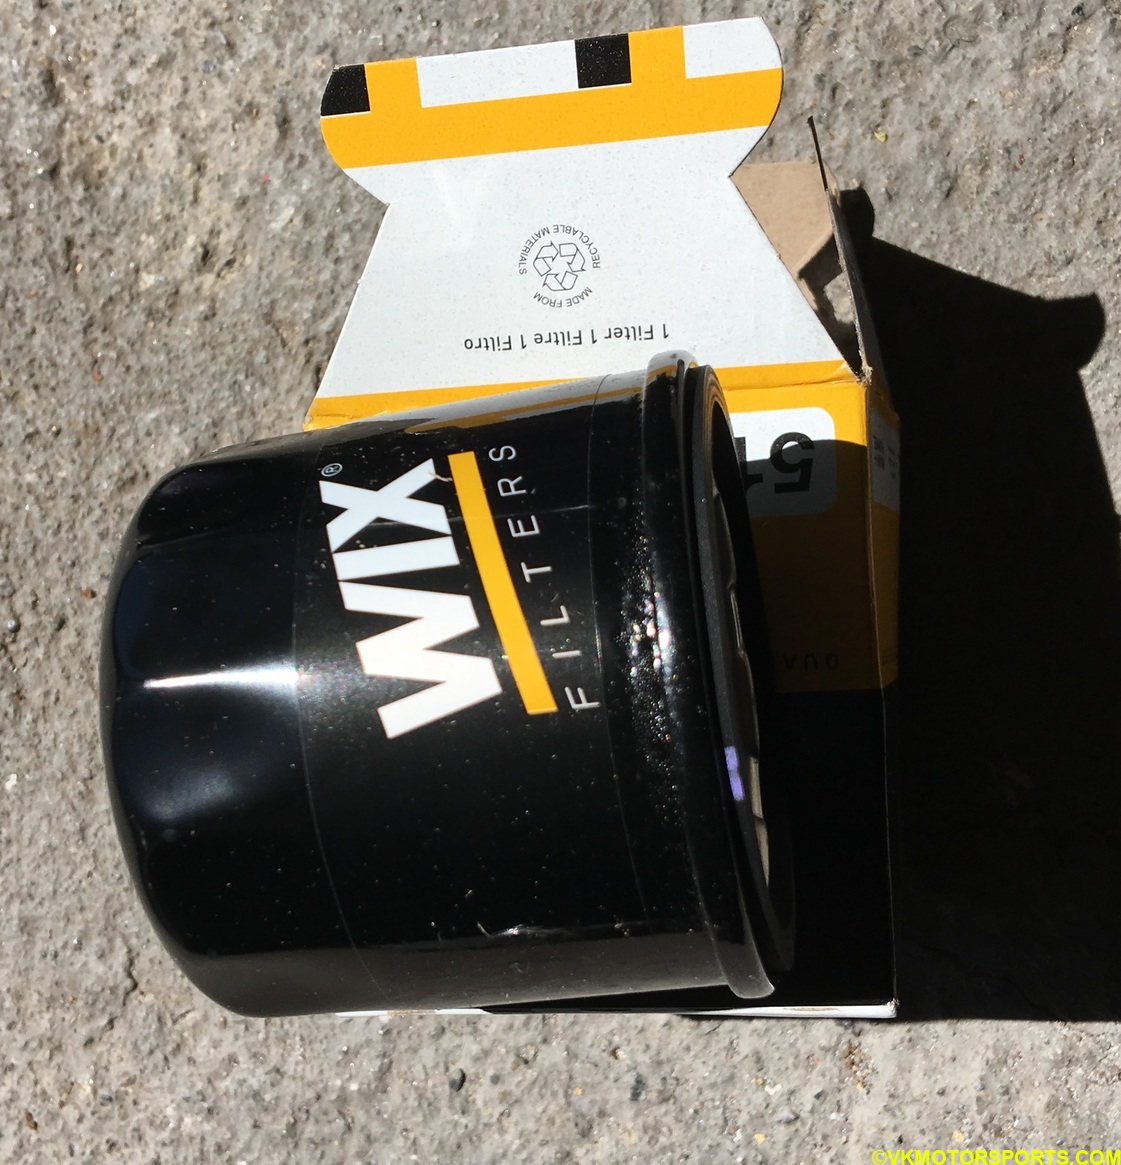 Figure 12. New Oil filter out of packaging